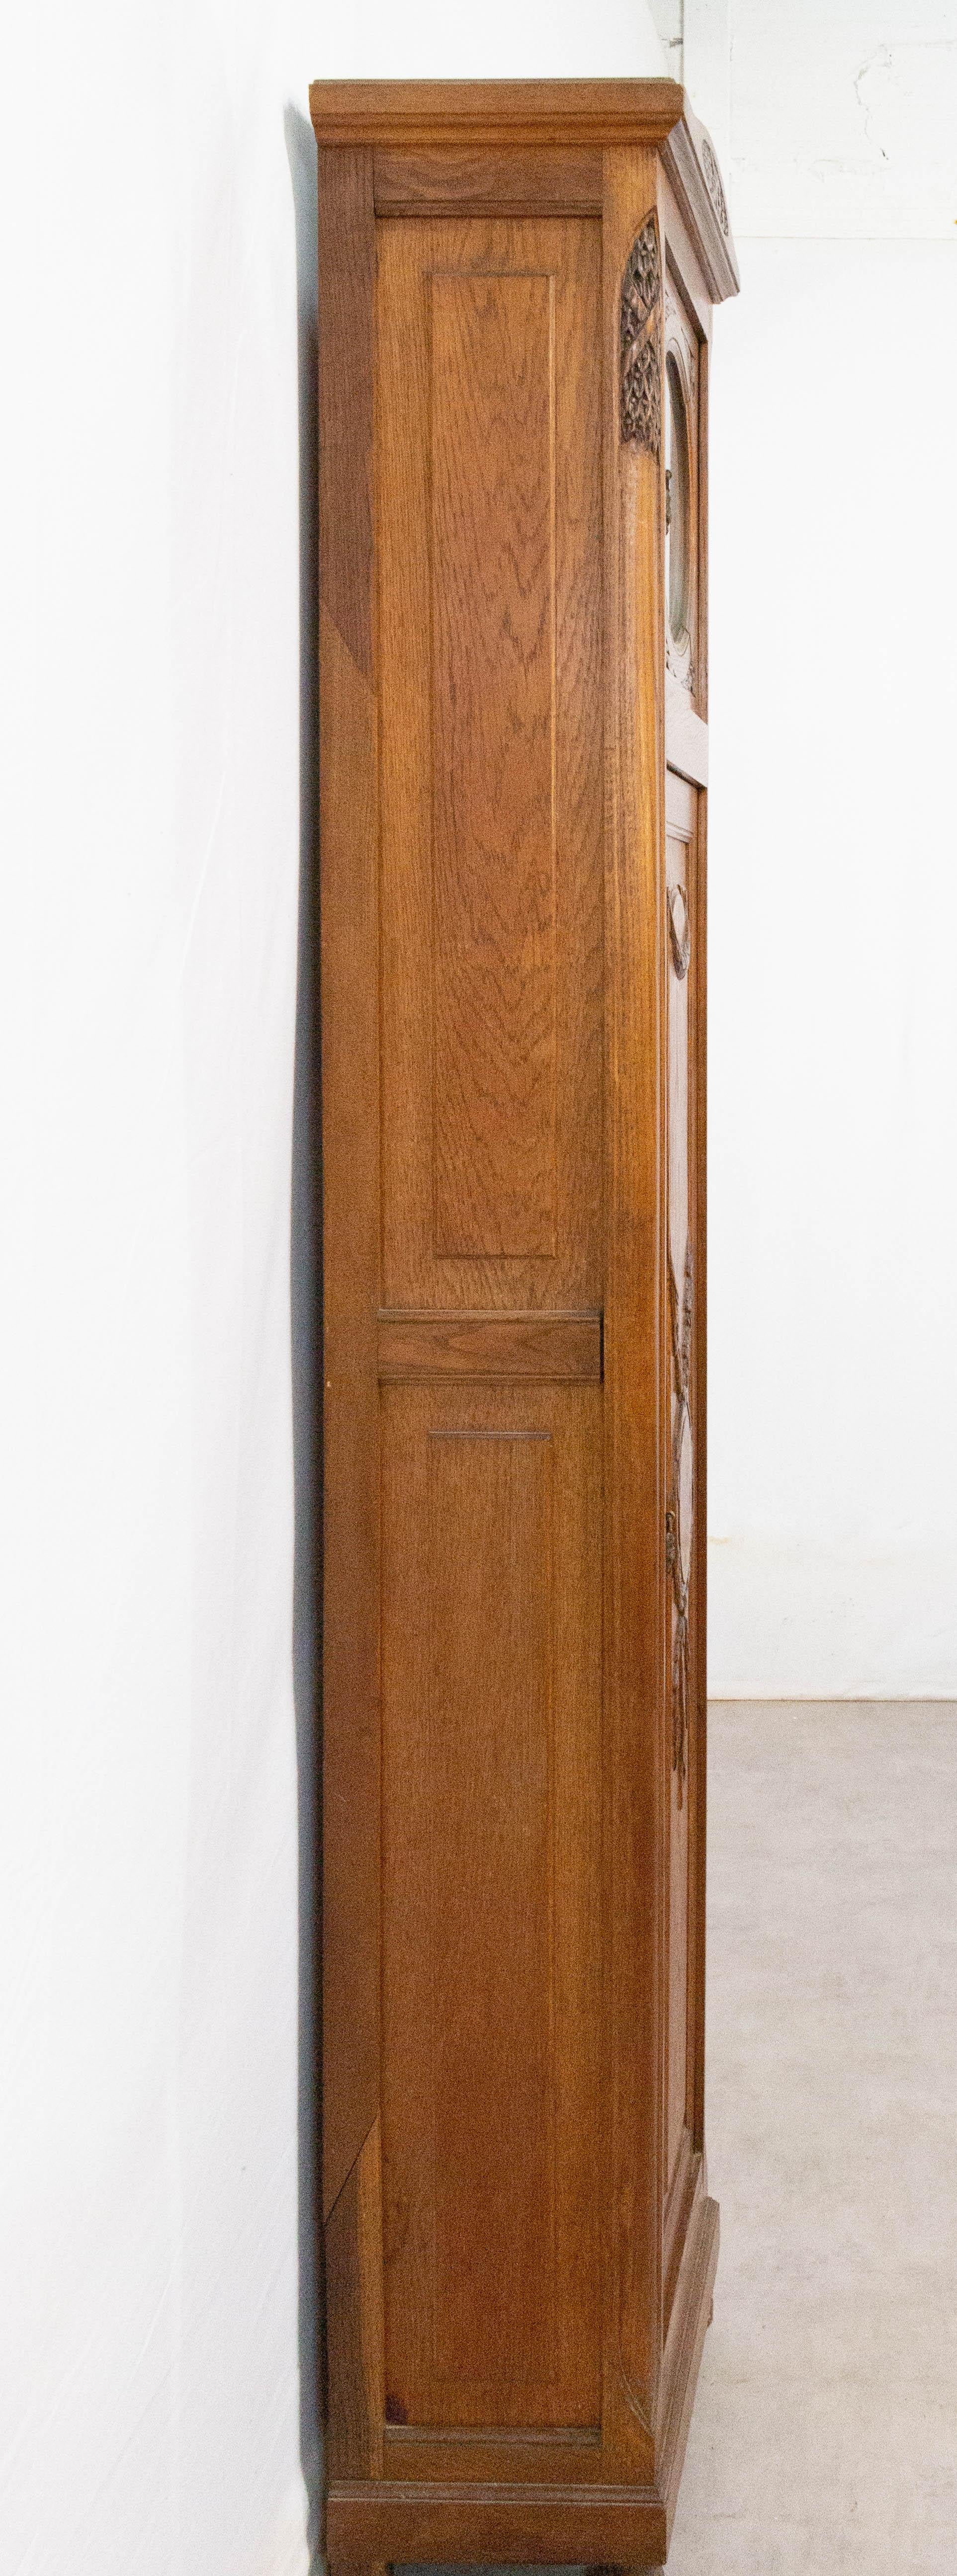 French Cupboard into a art nouveau/art deco longcase clock
Oak
The shelves can be renovated if you wish
Good antique condition.

For shipping:
203x30x45 cm 30kg